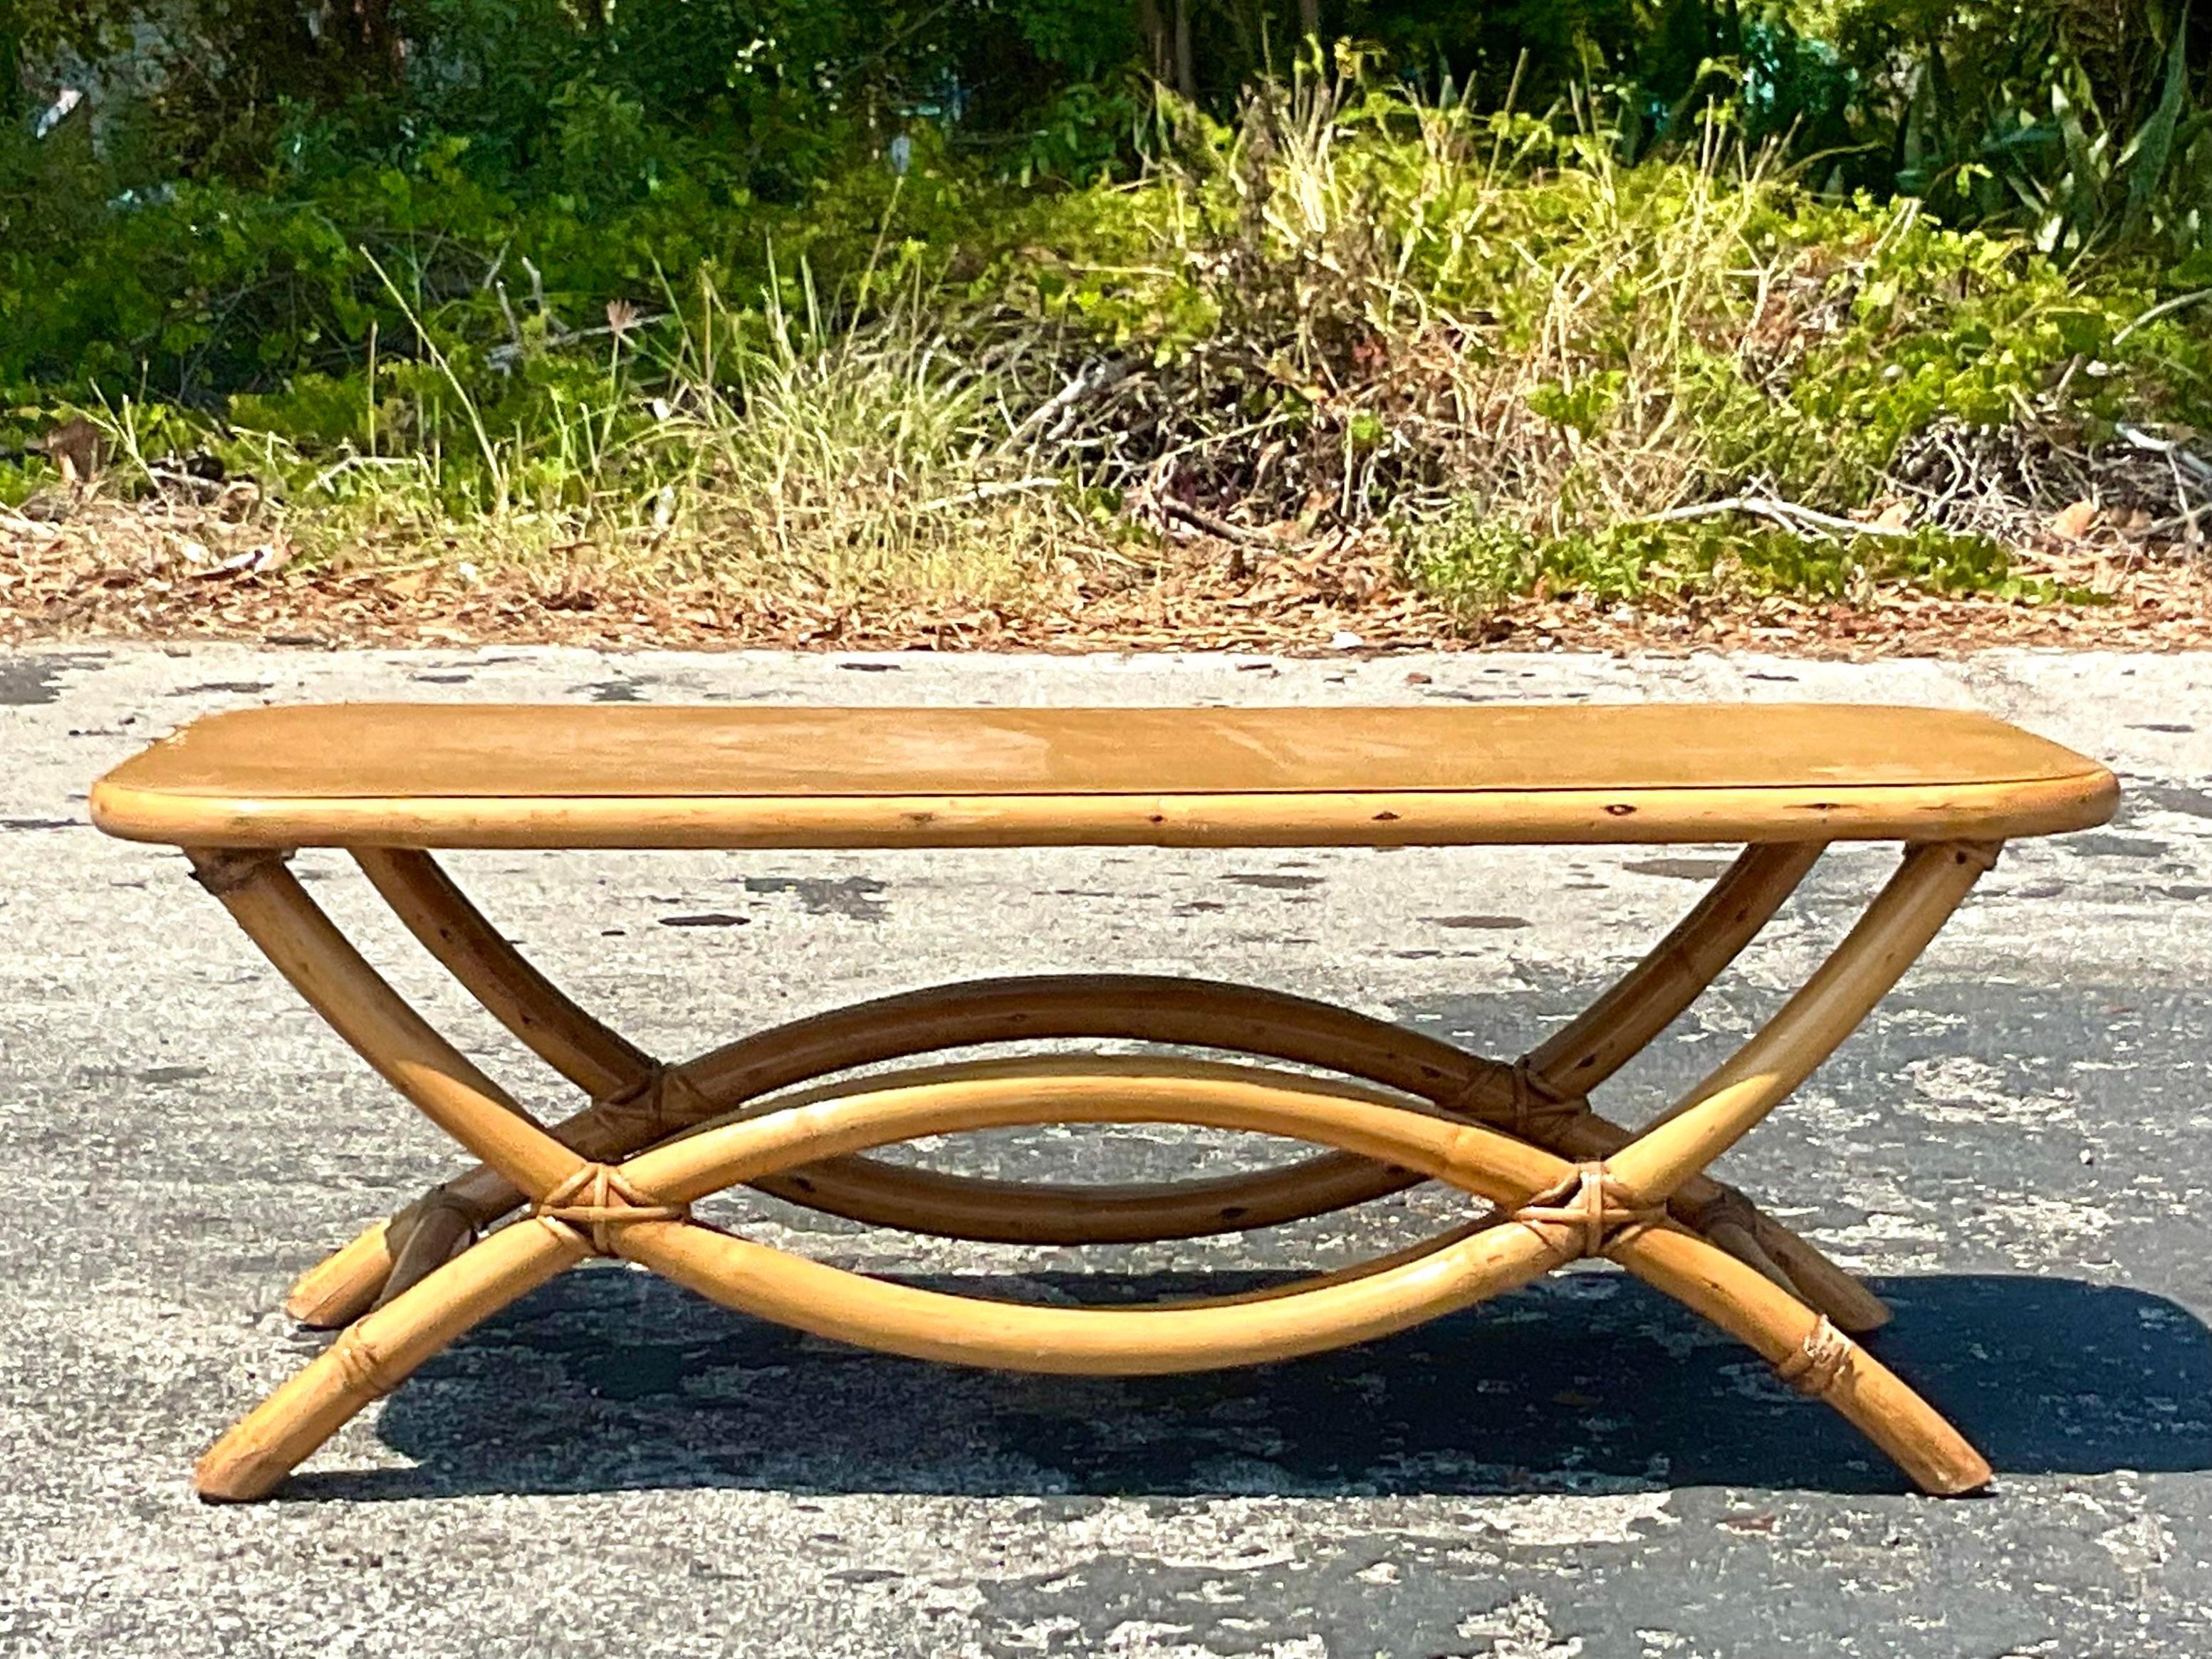 A fabulous vintage Coastal coffee table. Chic bent rattan in a loop design. Acquired from a Palm Beach estate.